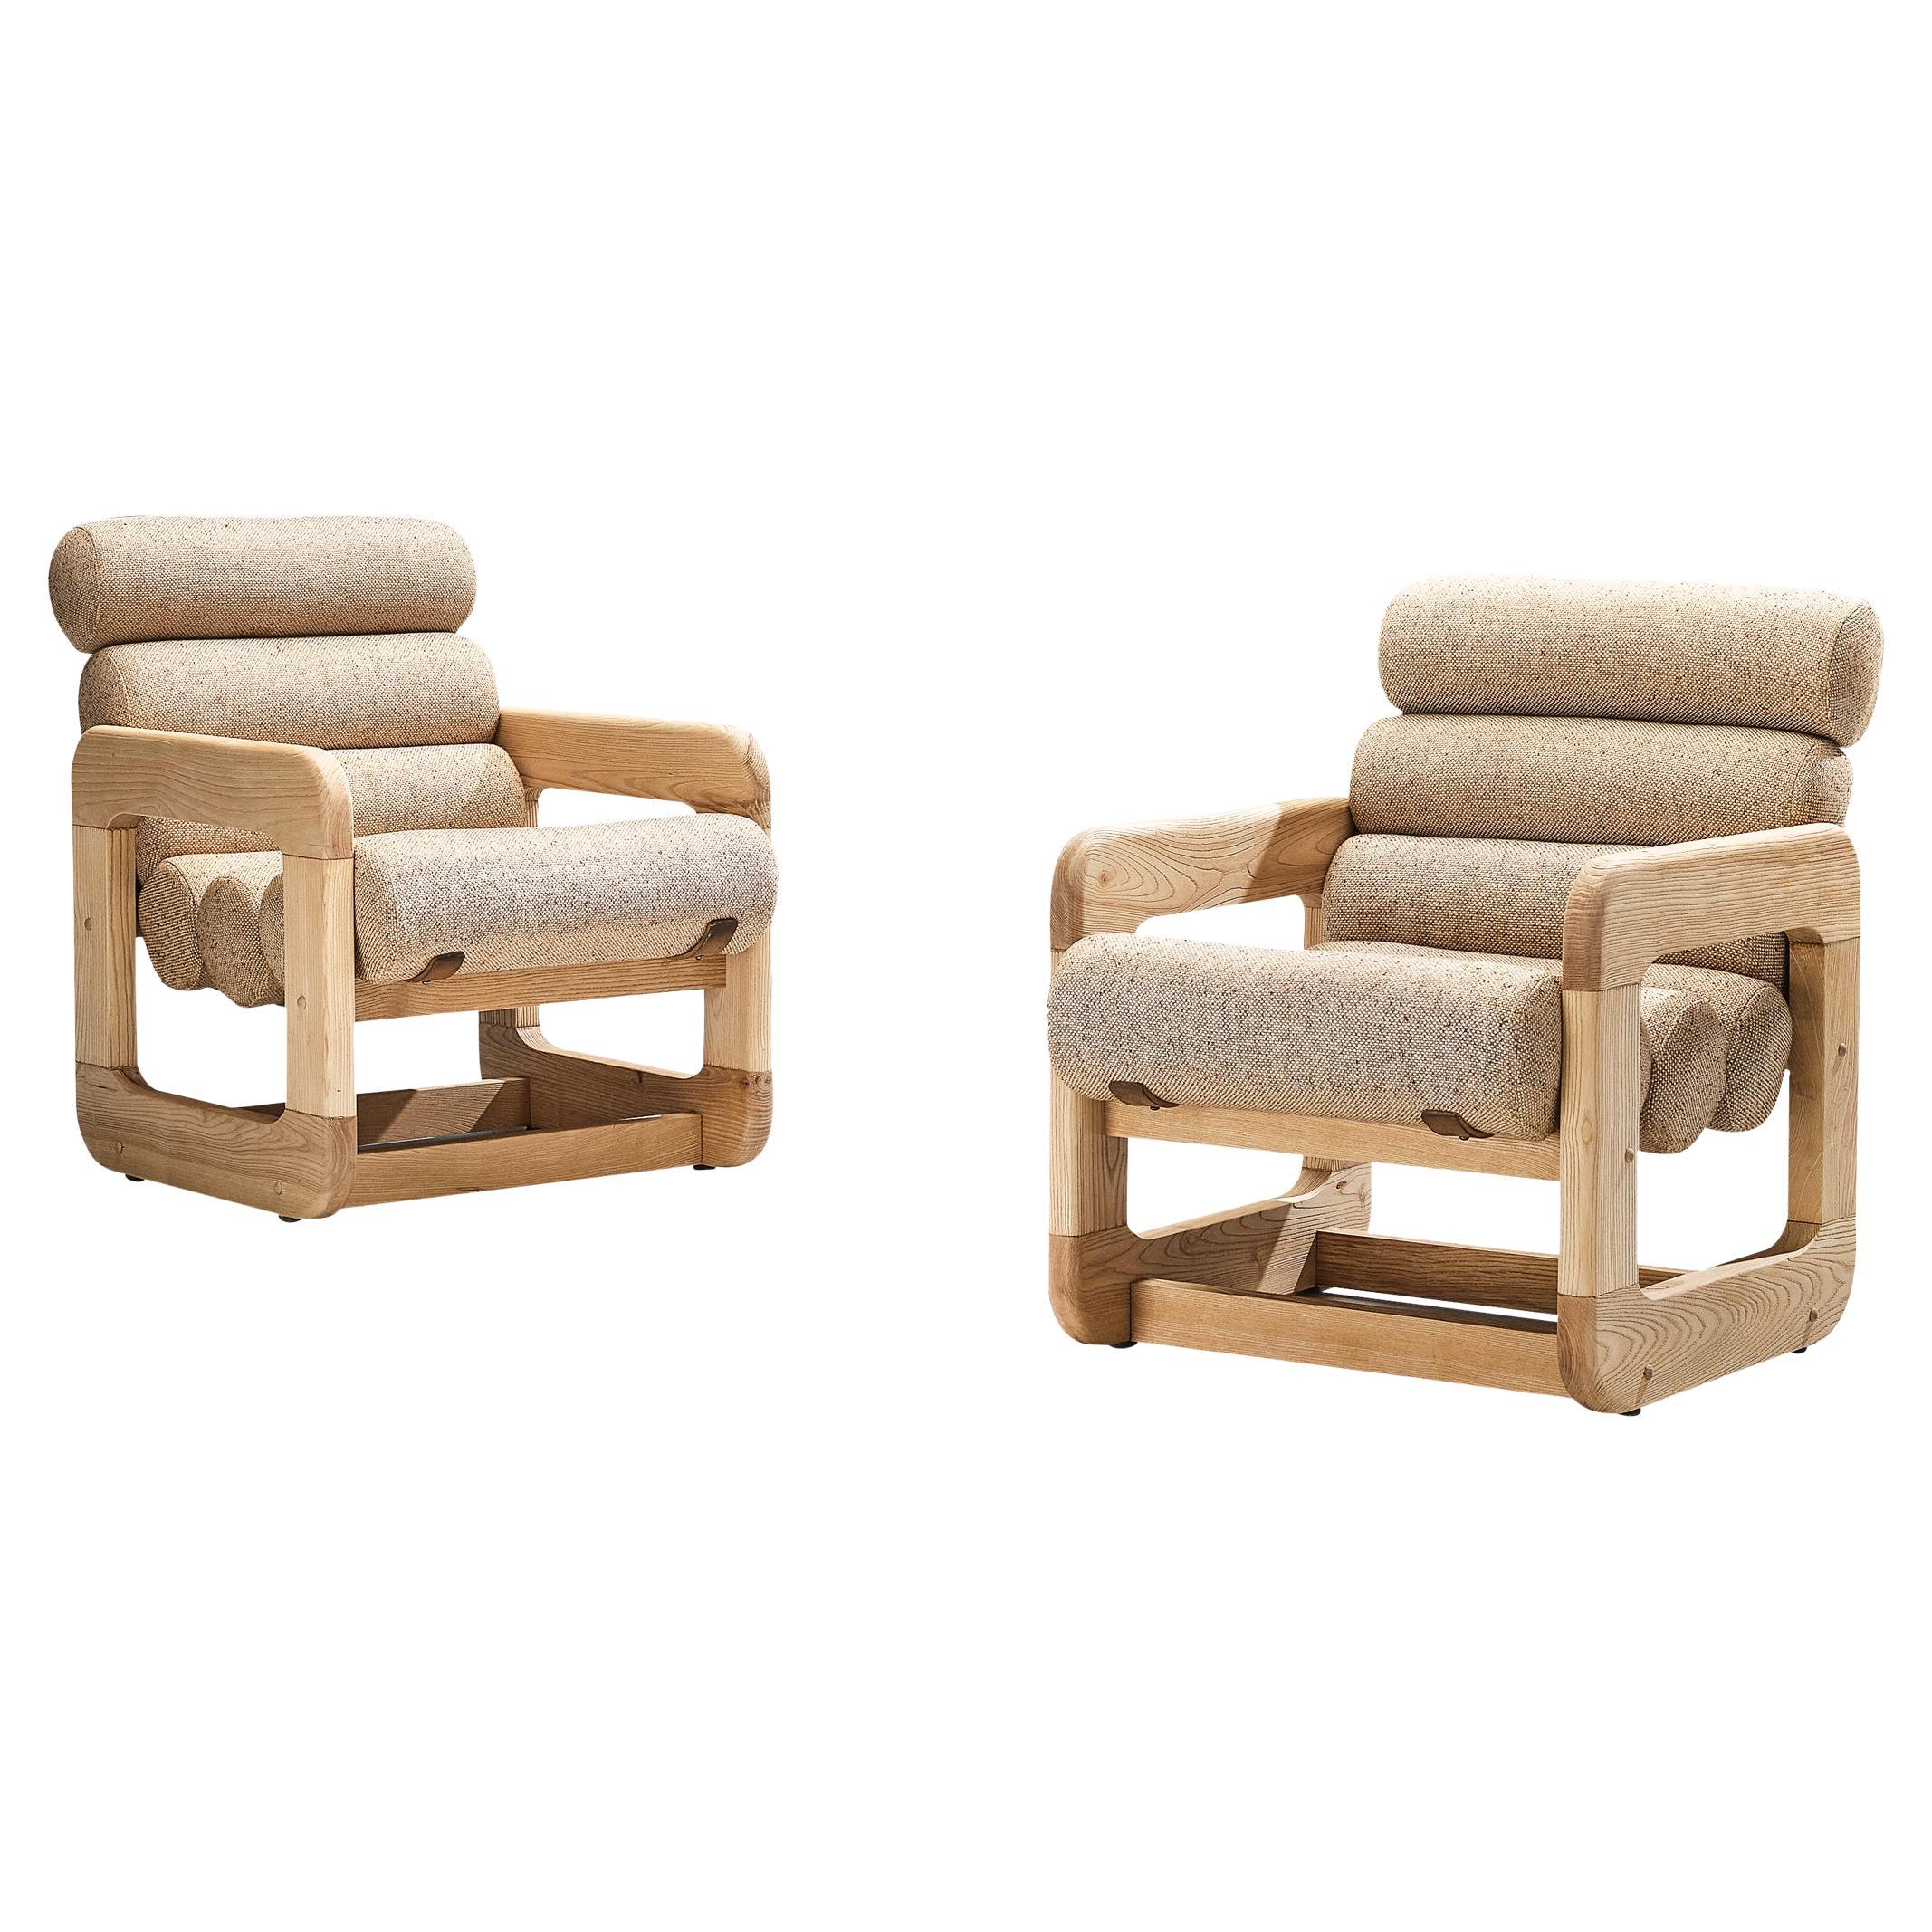 Pair of Extraordinary Lounge Chairs in Ash and Beige Upholstery